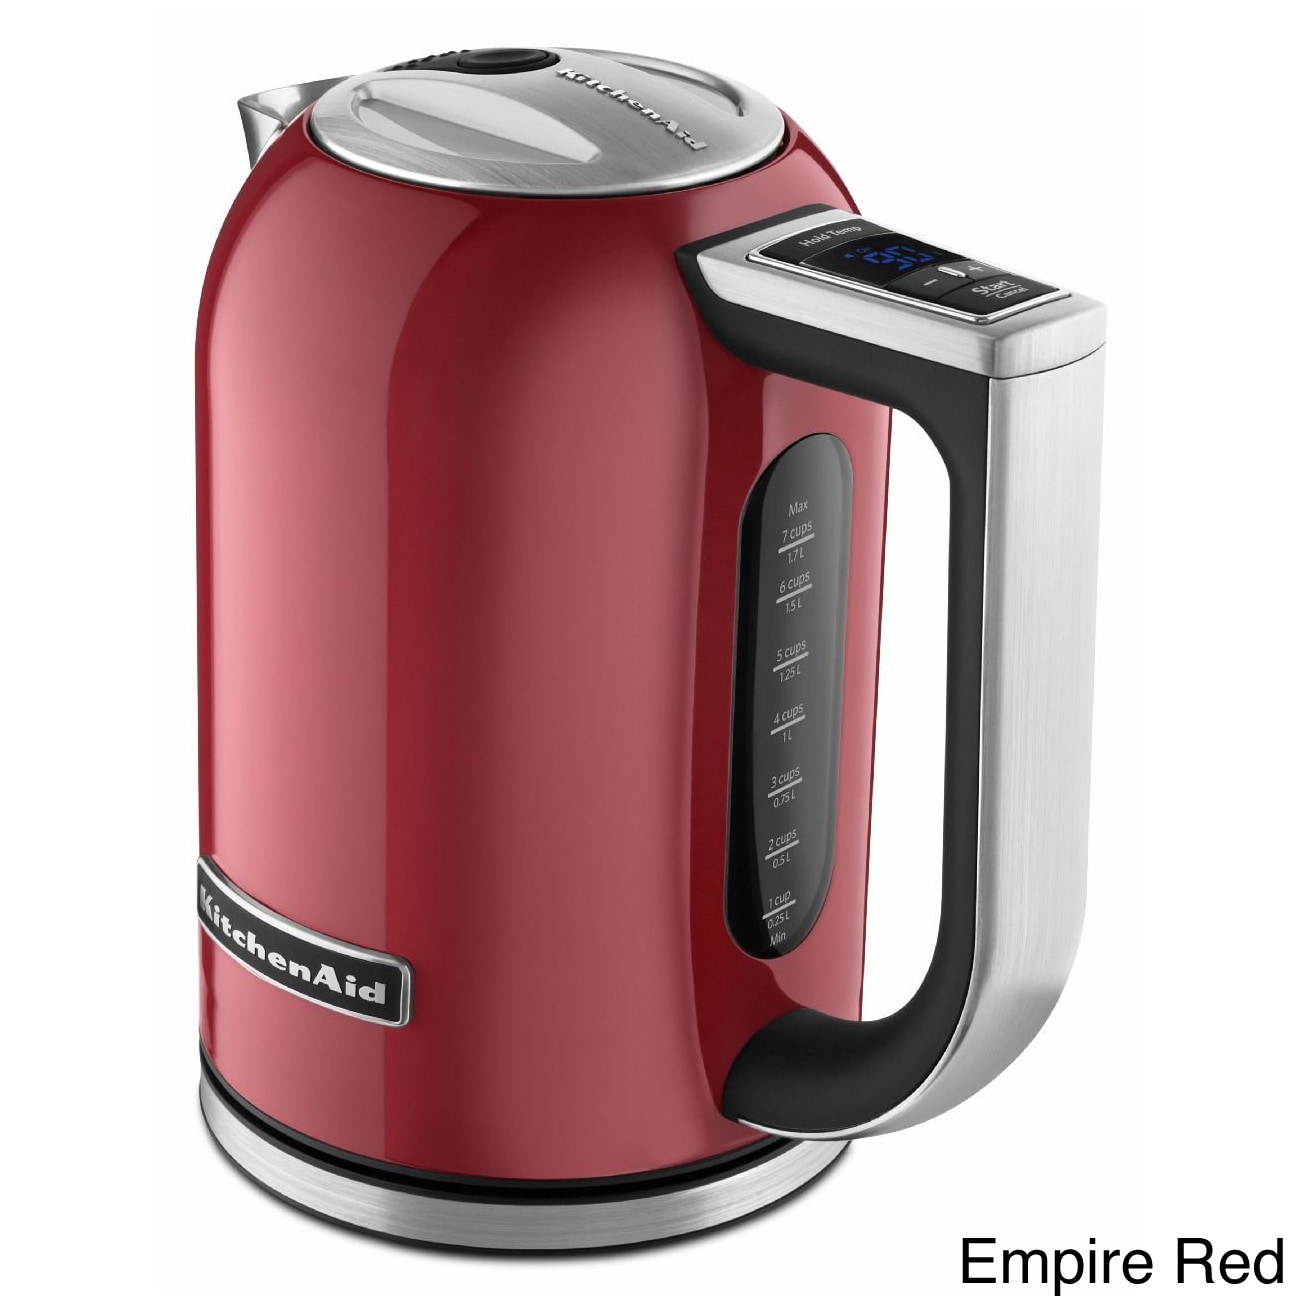 https://ak1.ostkcdn.com/images/products/8753791/Empire-Red-KitchenAid-KEK1722-1.7-Liter-Electric-Kettle-with-LED-Display-52141dea-6bb0-48f3-a005-13fa2c9f17d8.jpg